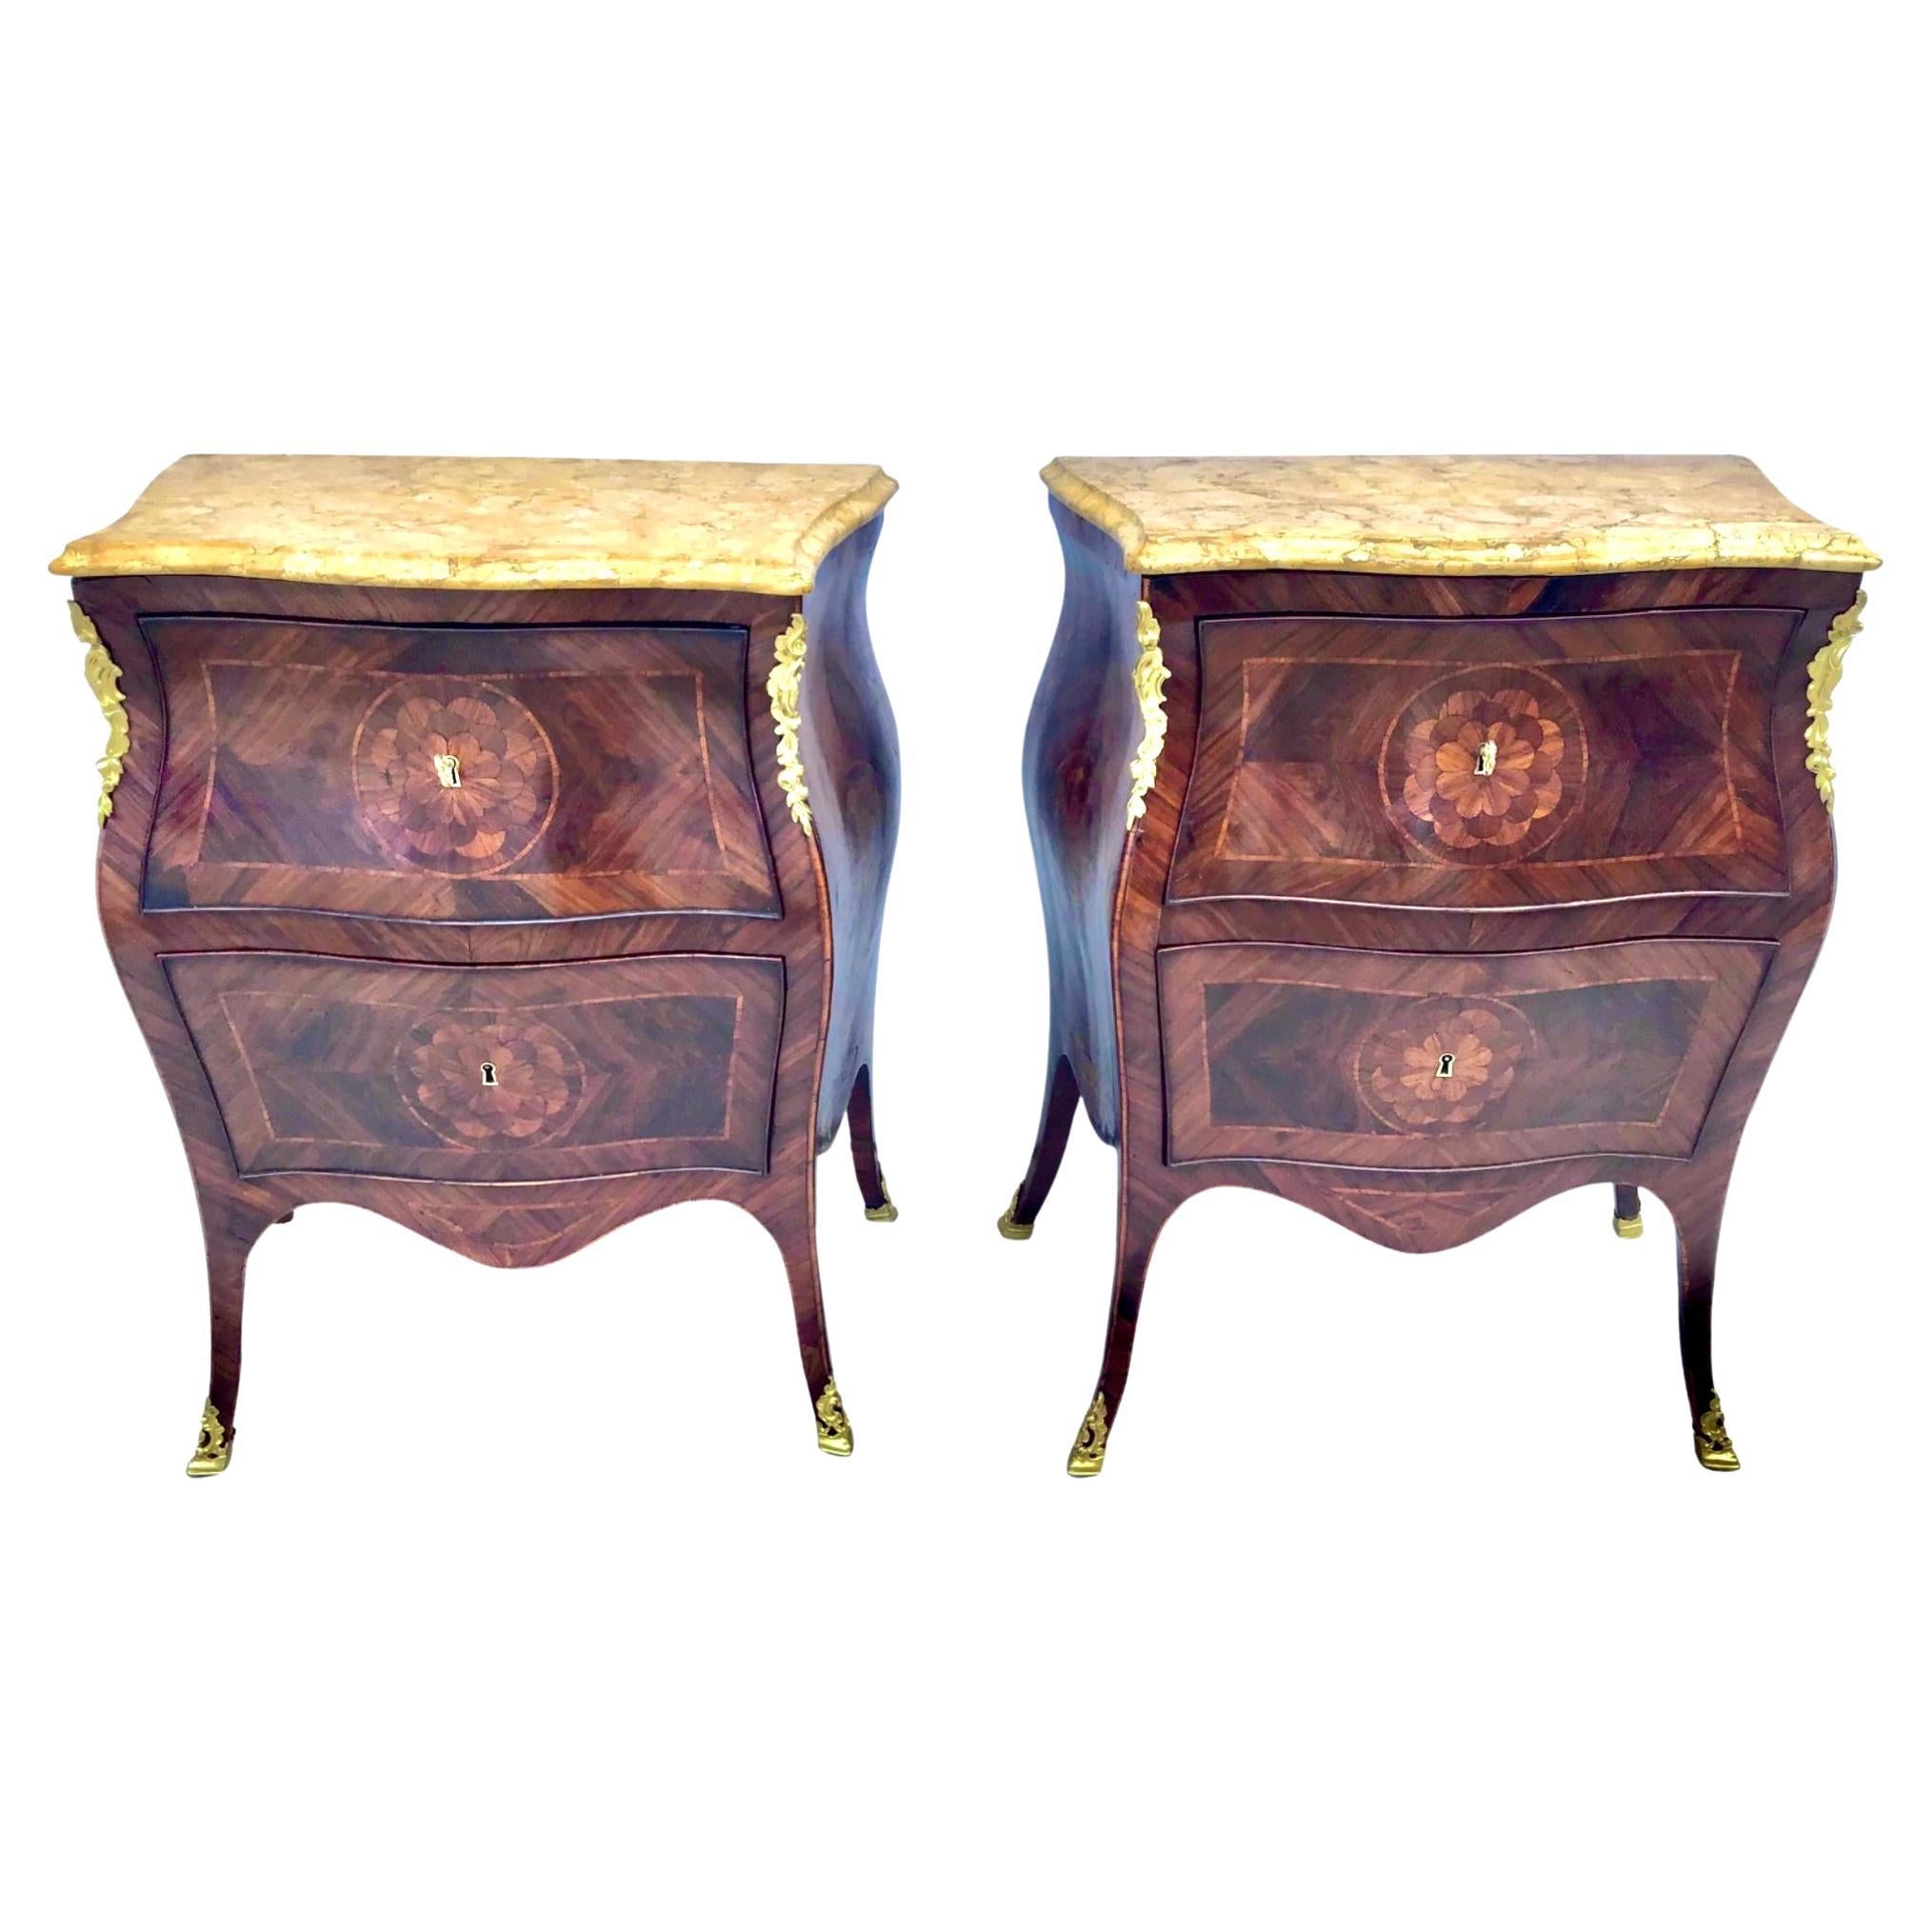  18th Century Italian Neapolitan Inlaid Nightstand Bed Side Tables Commodini